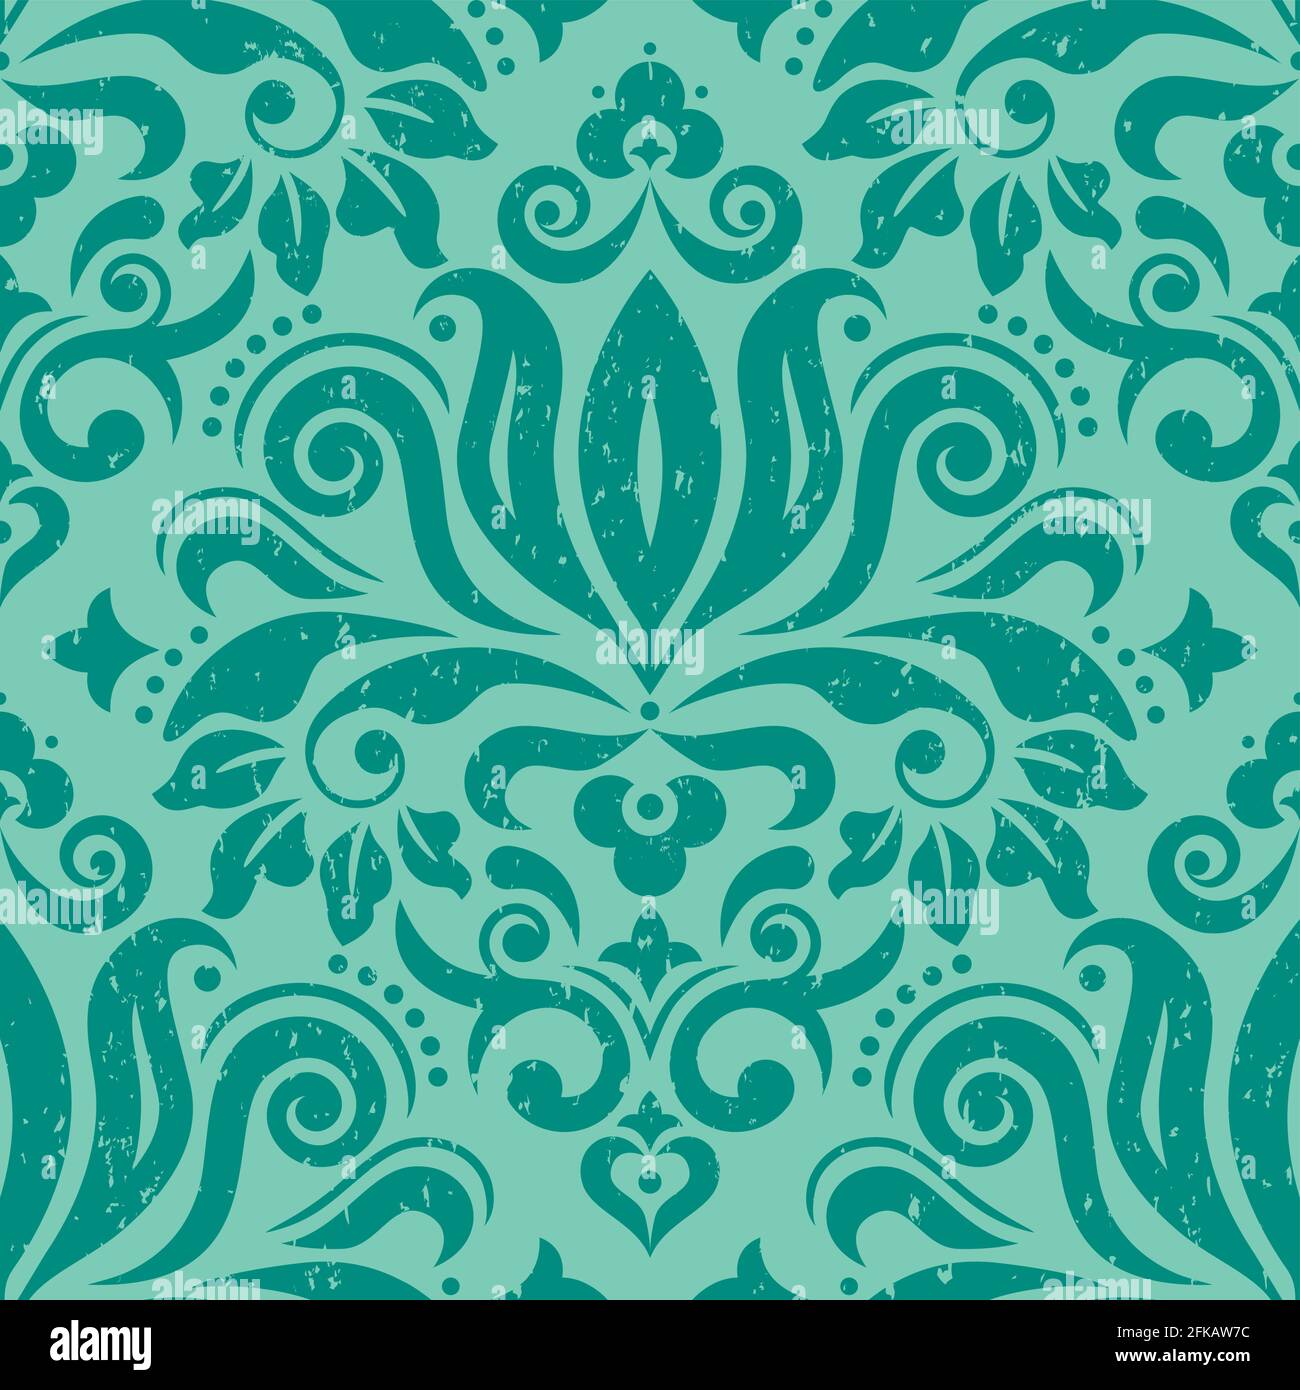 Retro Damask wallpaper or fabric print vector seamless pattern in green, scratched textile vector design with flowers, leaves and swirls Stock Vector